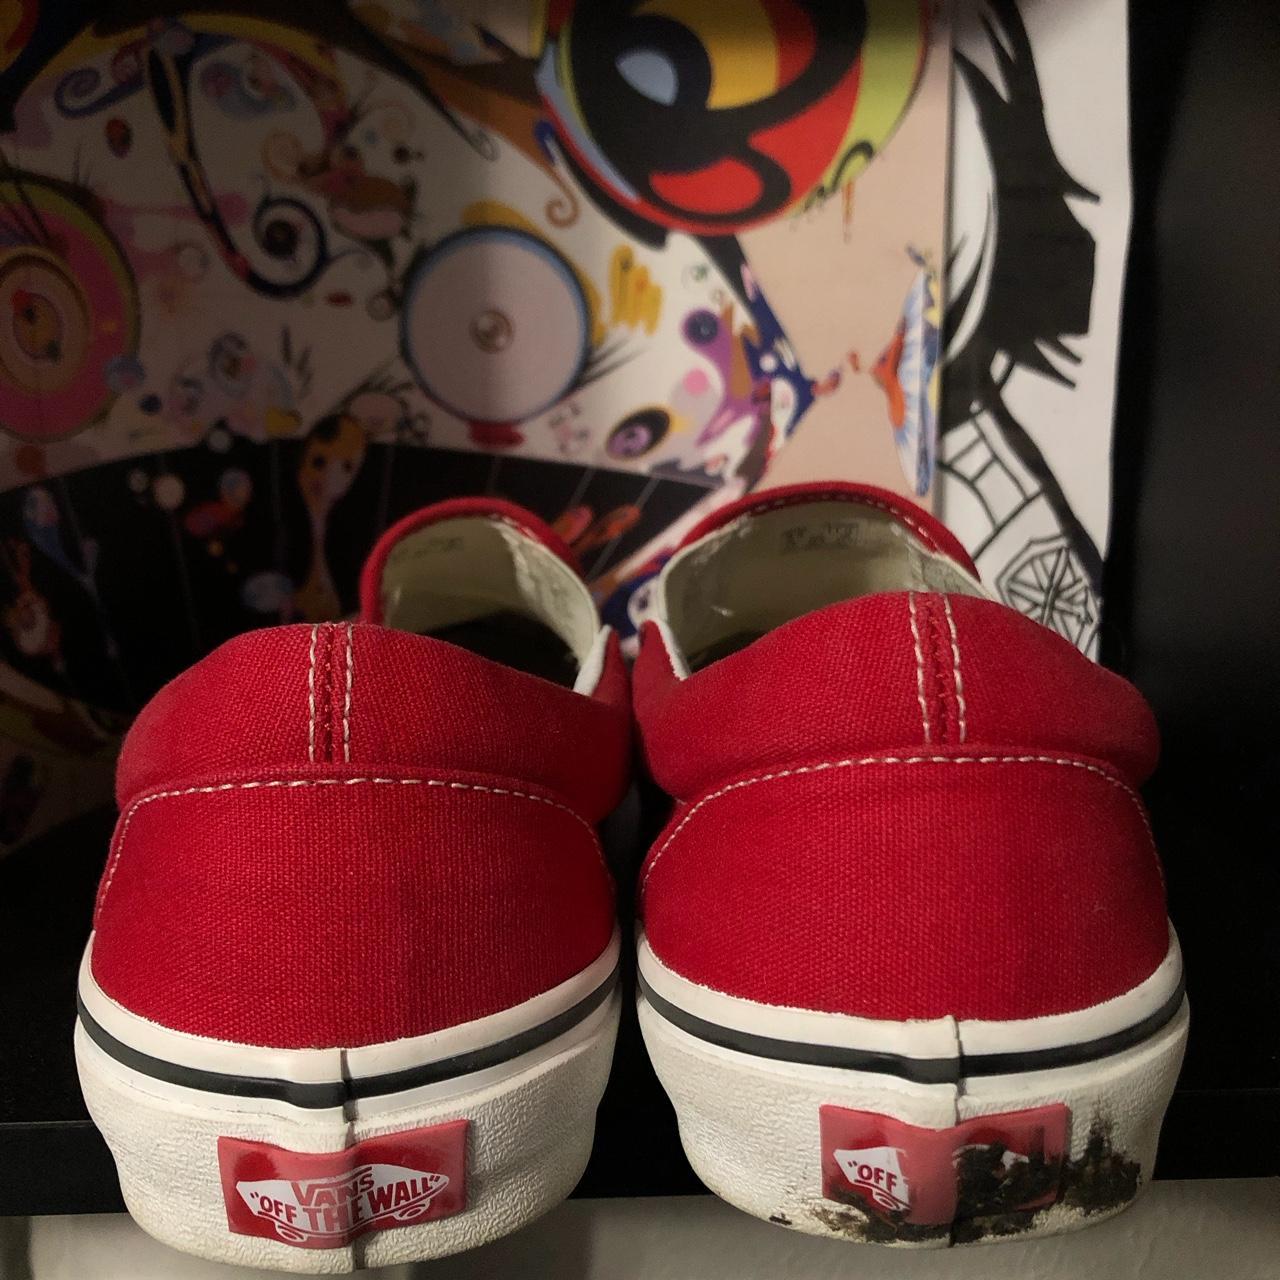 Vans Men's Red and White Trainers (3)